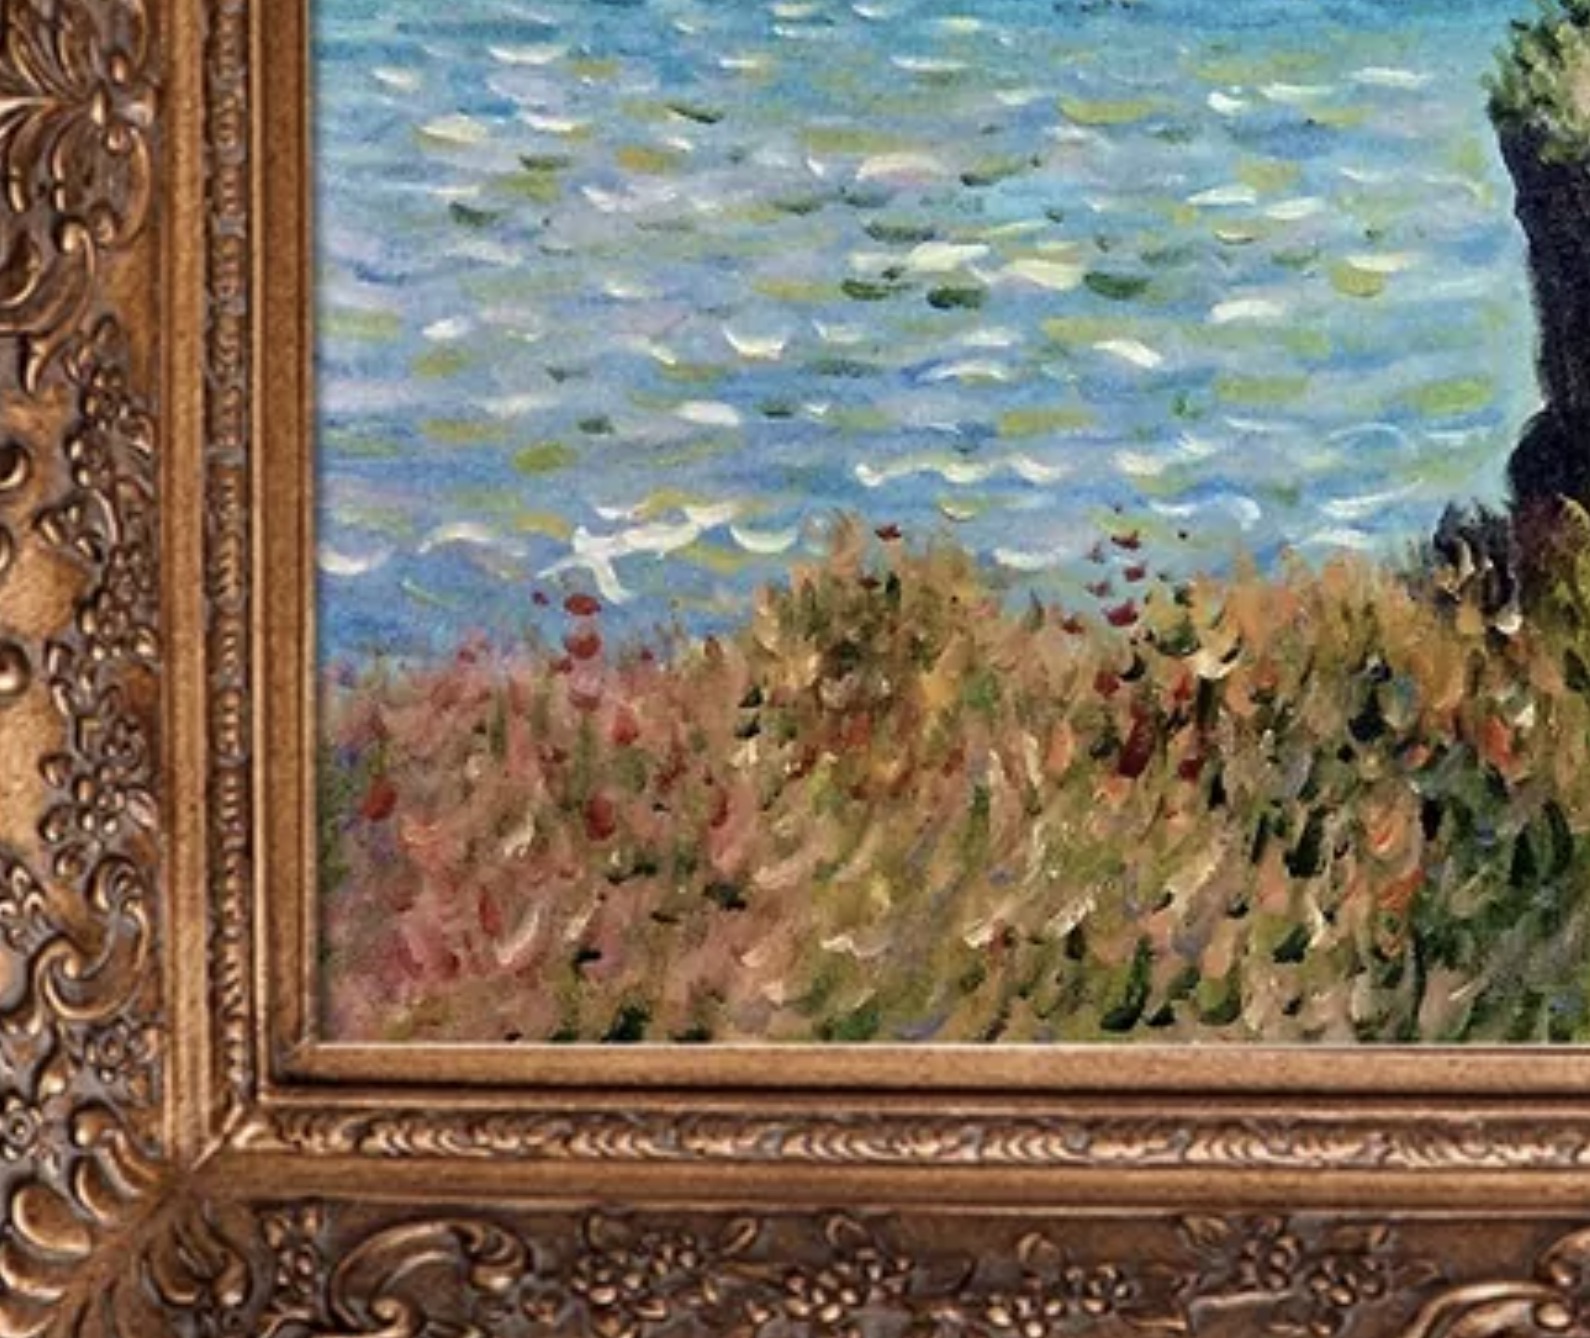 Claude Monet "Cliff Walk at Porville, 1882" Oil Painting, After - Image 5 of 6